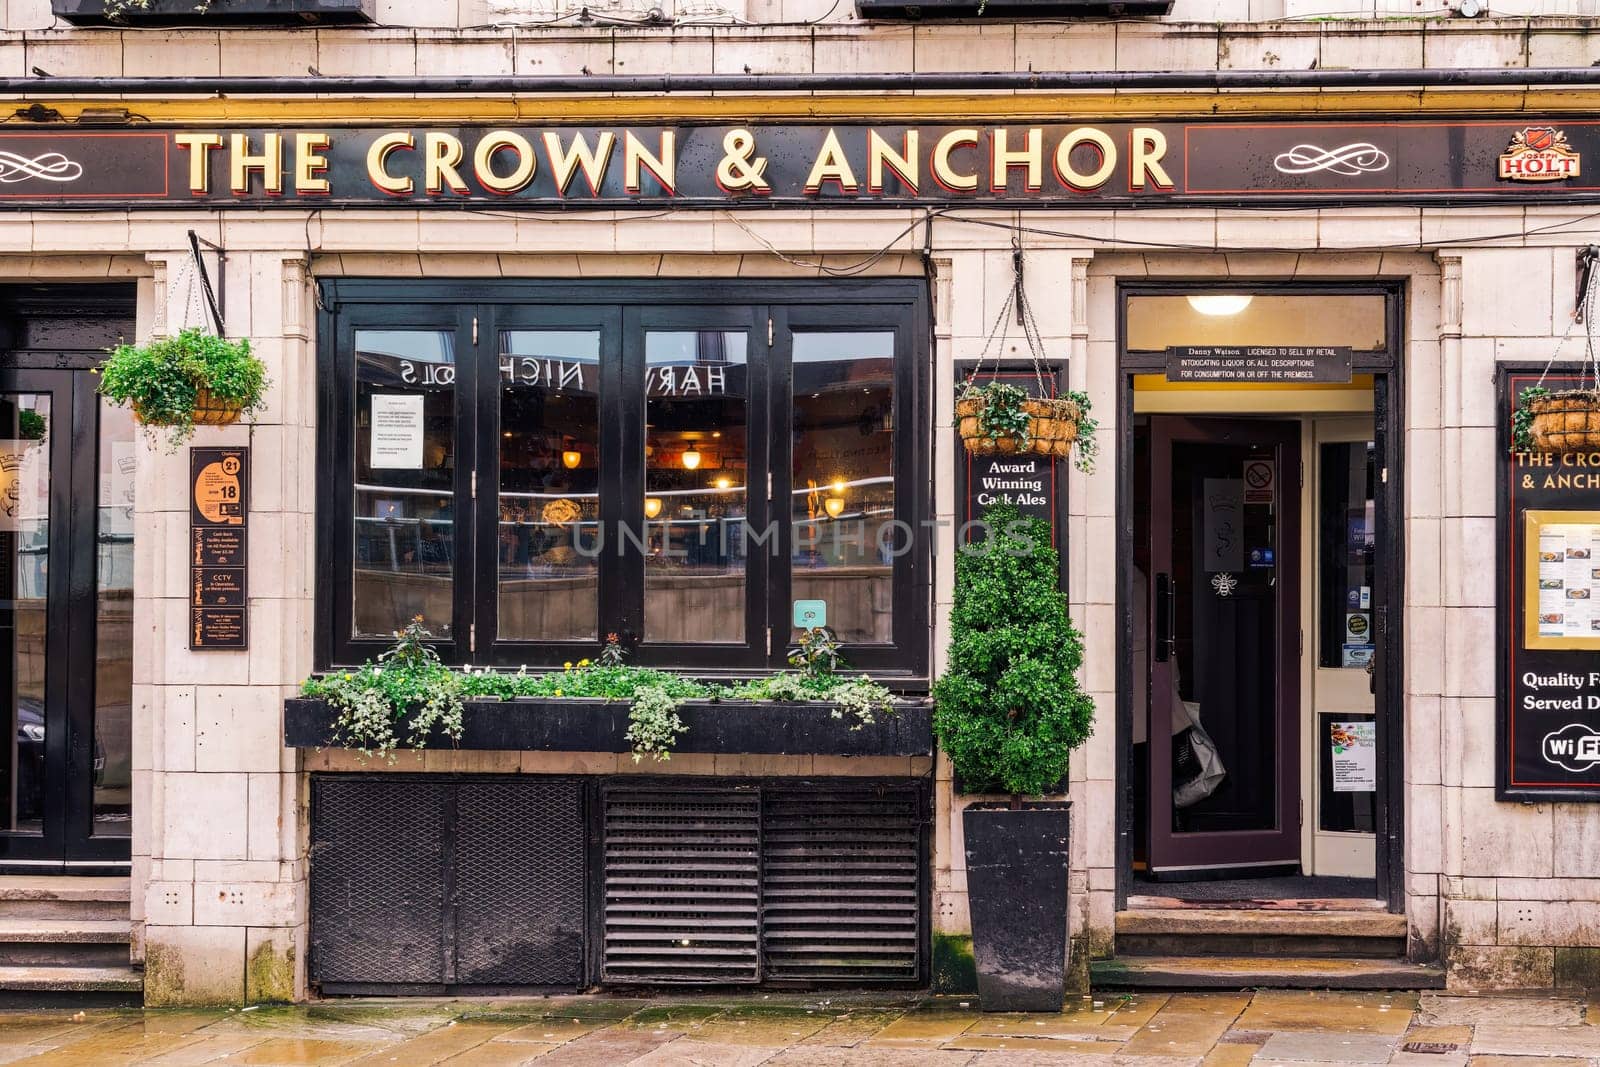 The Crown and Anchor pub facade with house-brand ales and comfort food in Manchester, UK, operated by the Joseph Holt Brewery. by bestravelvideo